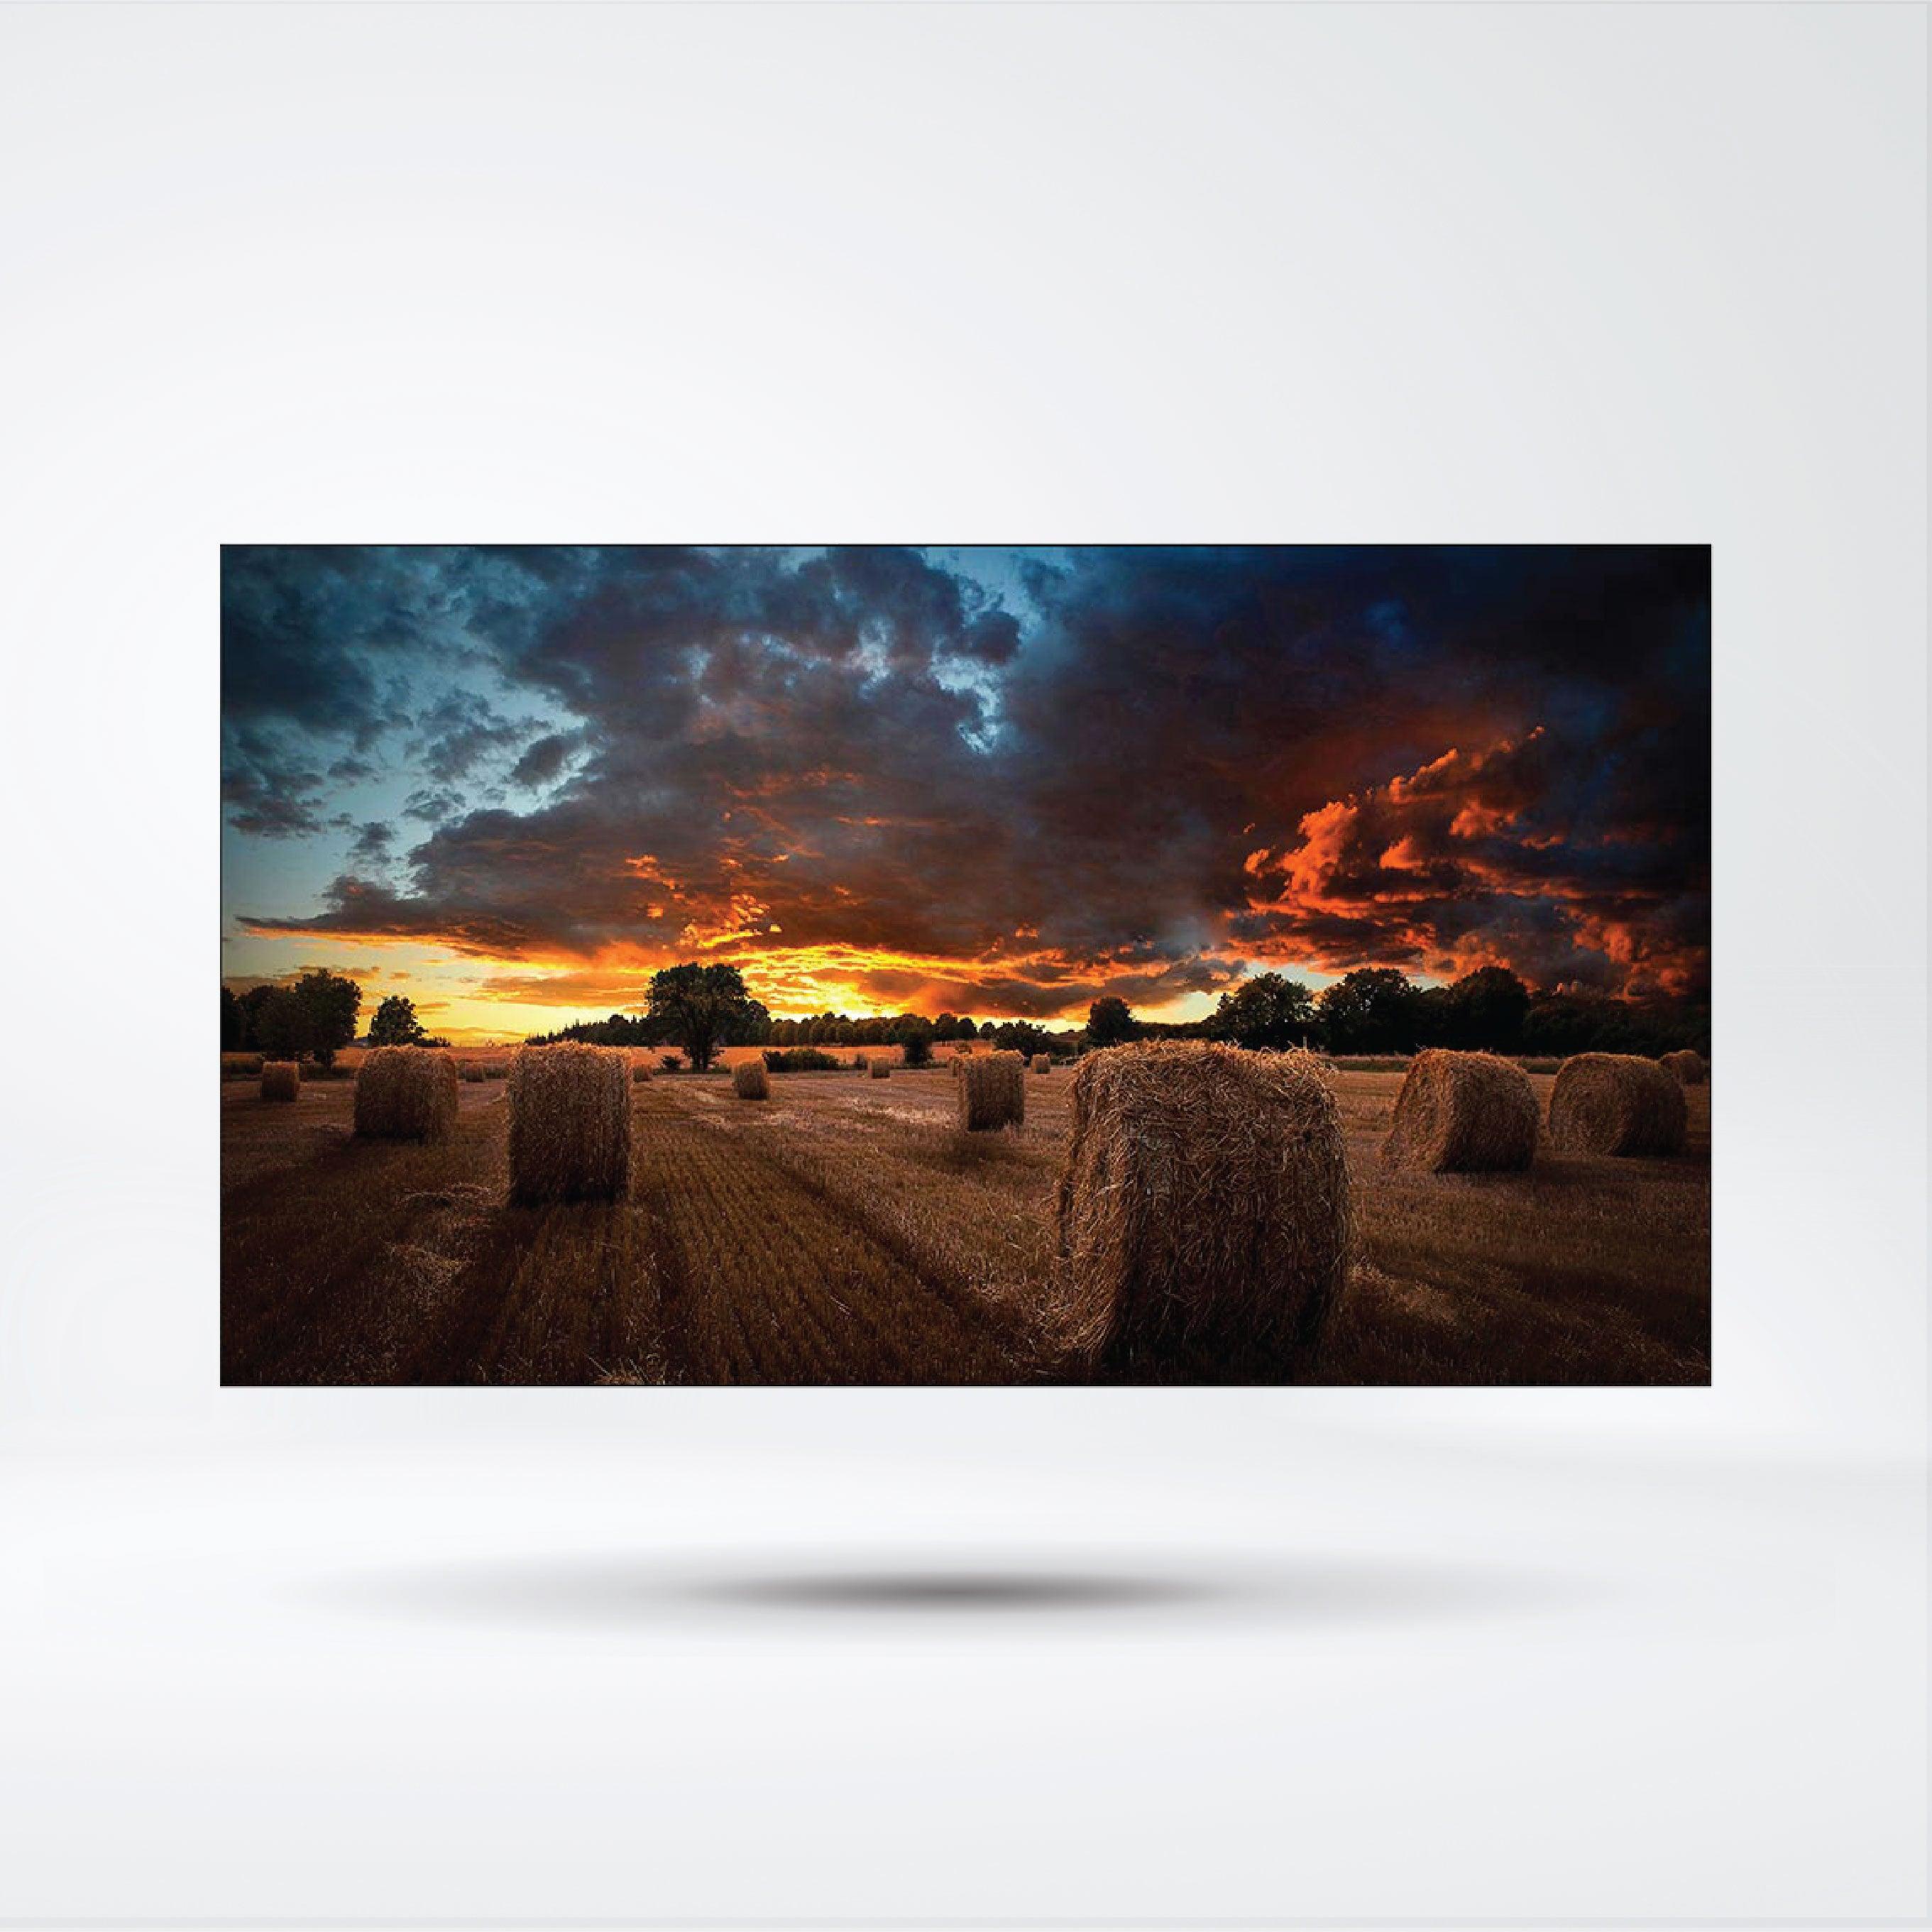 VM46B-U 46” 500nit Always-on, space-saving solution delivering a seamless visual experience - Riverplus